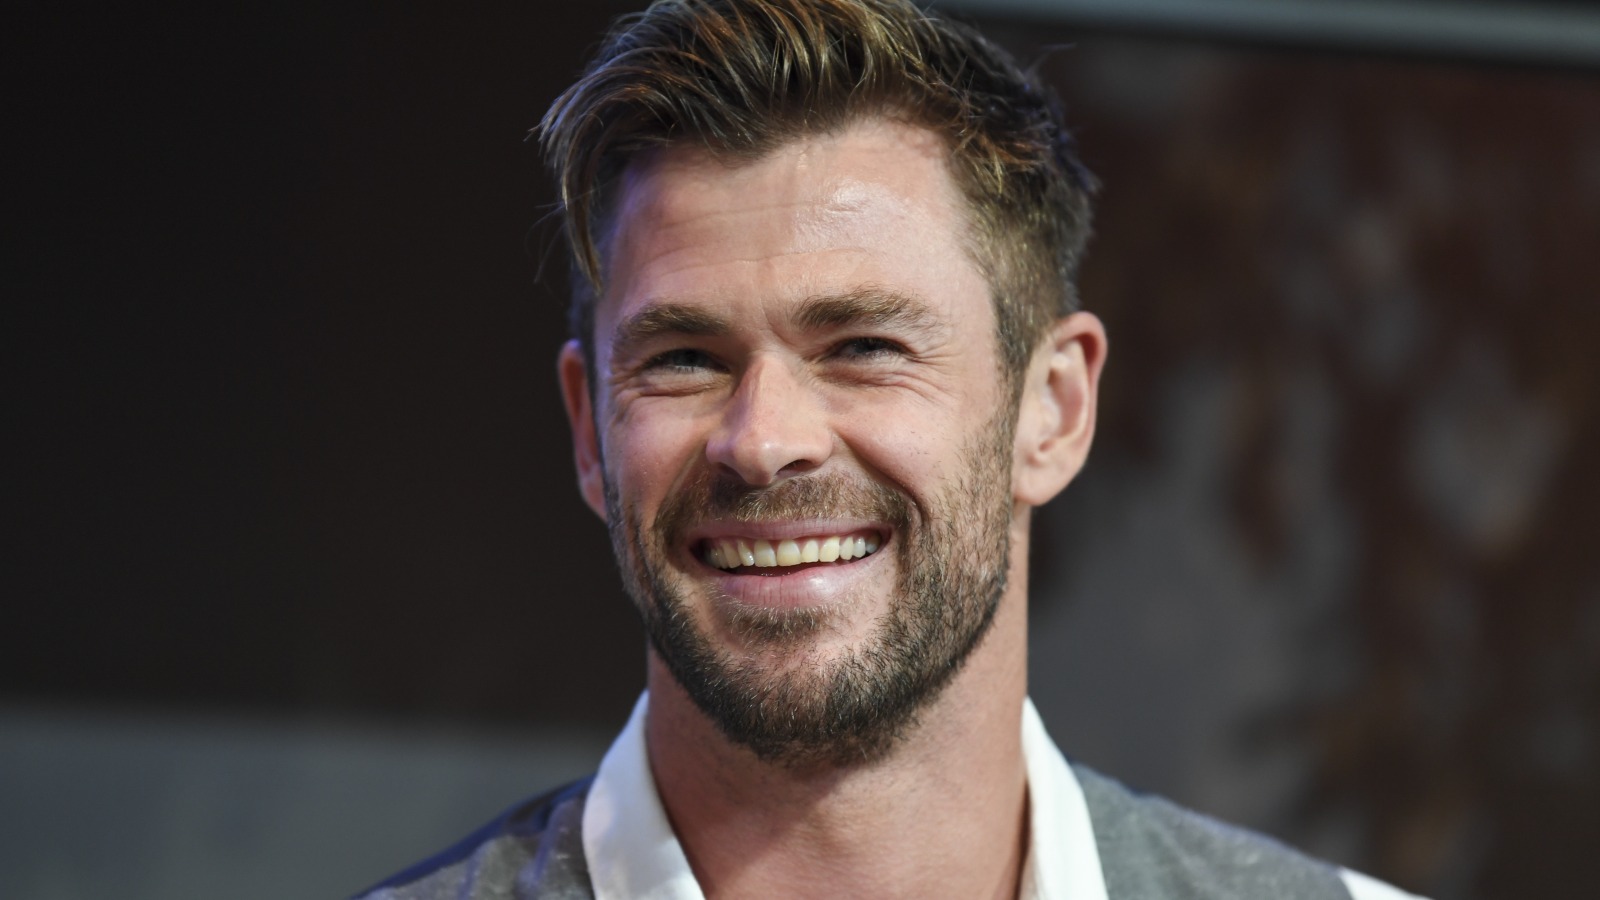 The real meaning behind Chris Hemsworth's tattoos